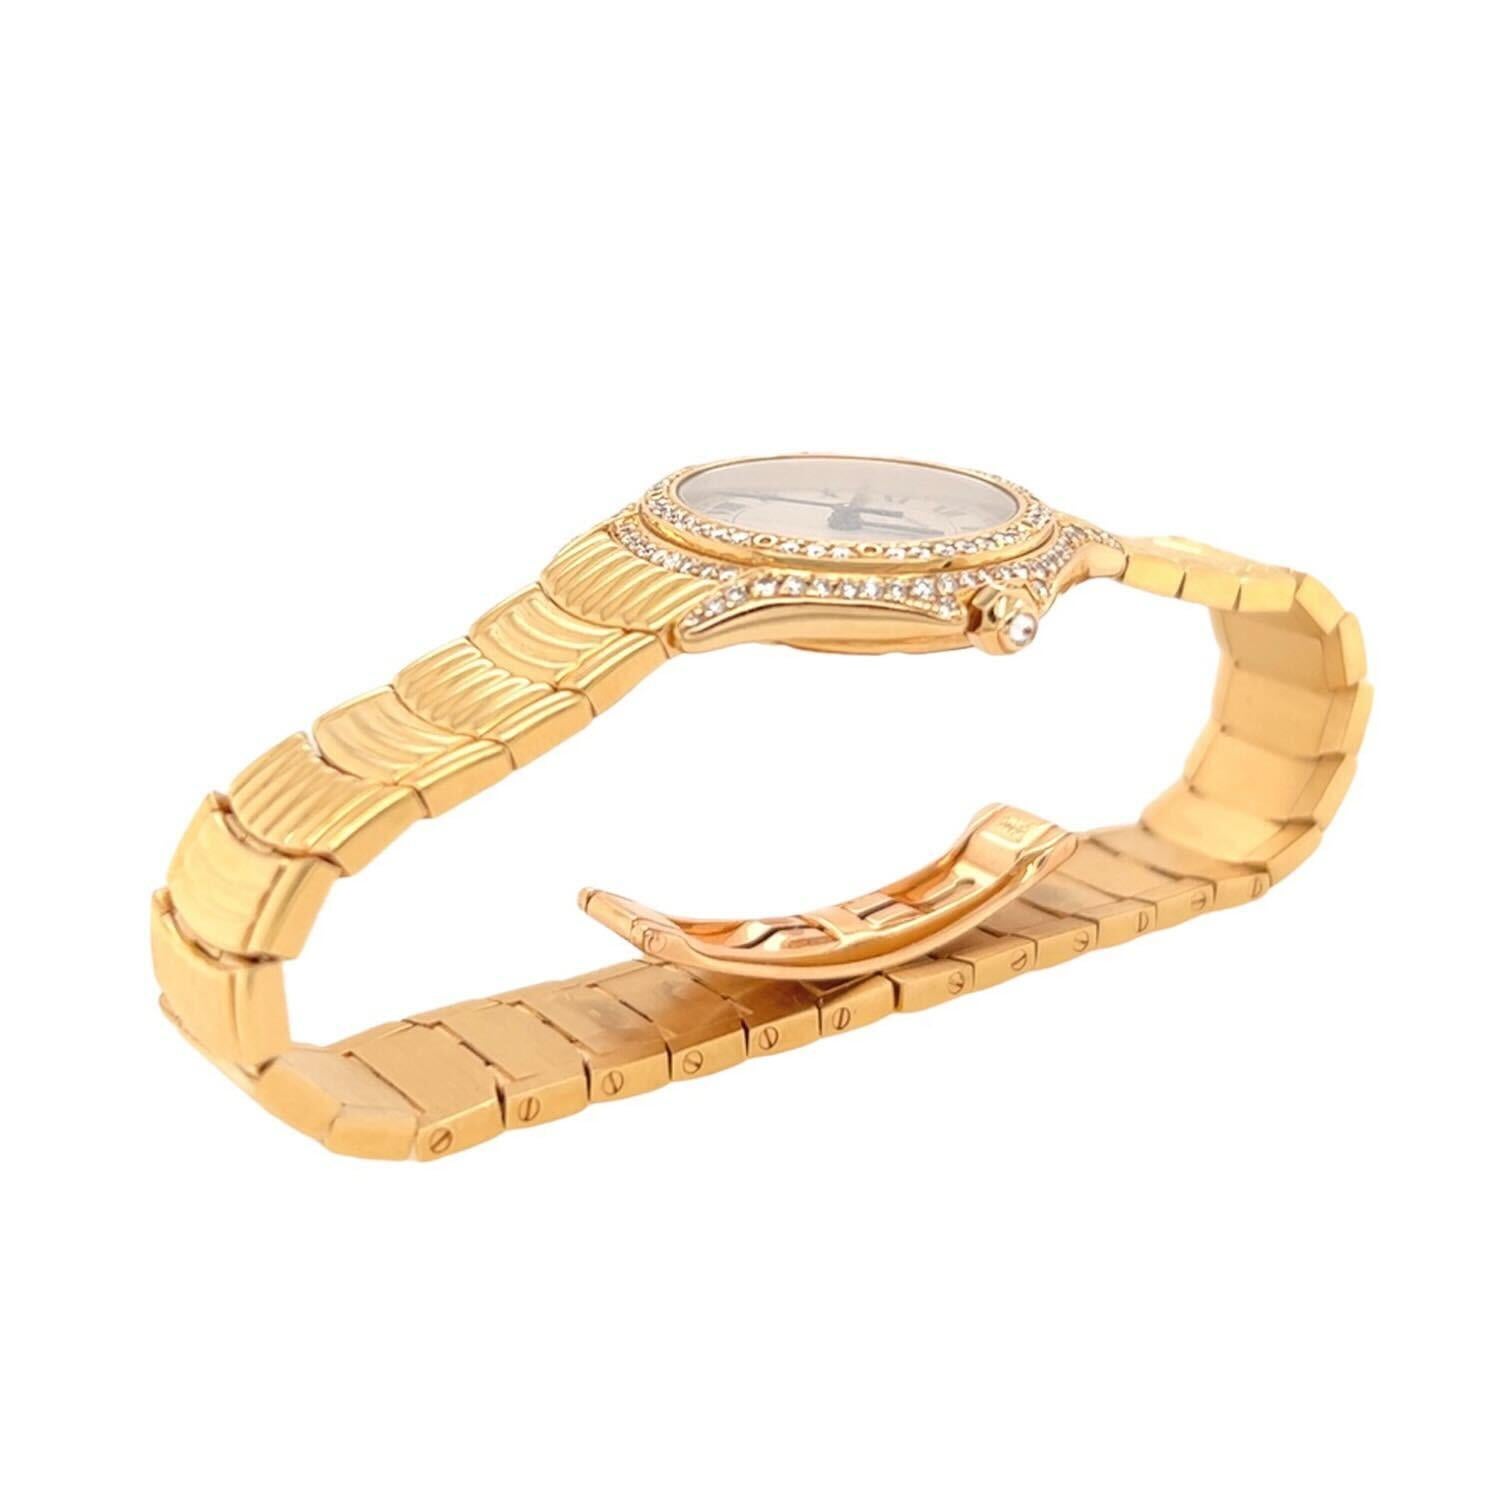 An 18 karat yellow gold and diamond watch, Cartier.  The quartz movement “Cougar” watch with a cream colored dial, Roman numerals, secret signature at 10, date window at 3, a bezel set with approximately one hundred ten diamonds in two rows and a